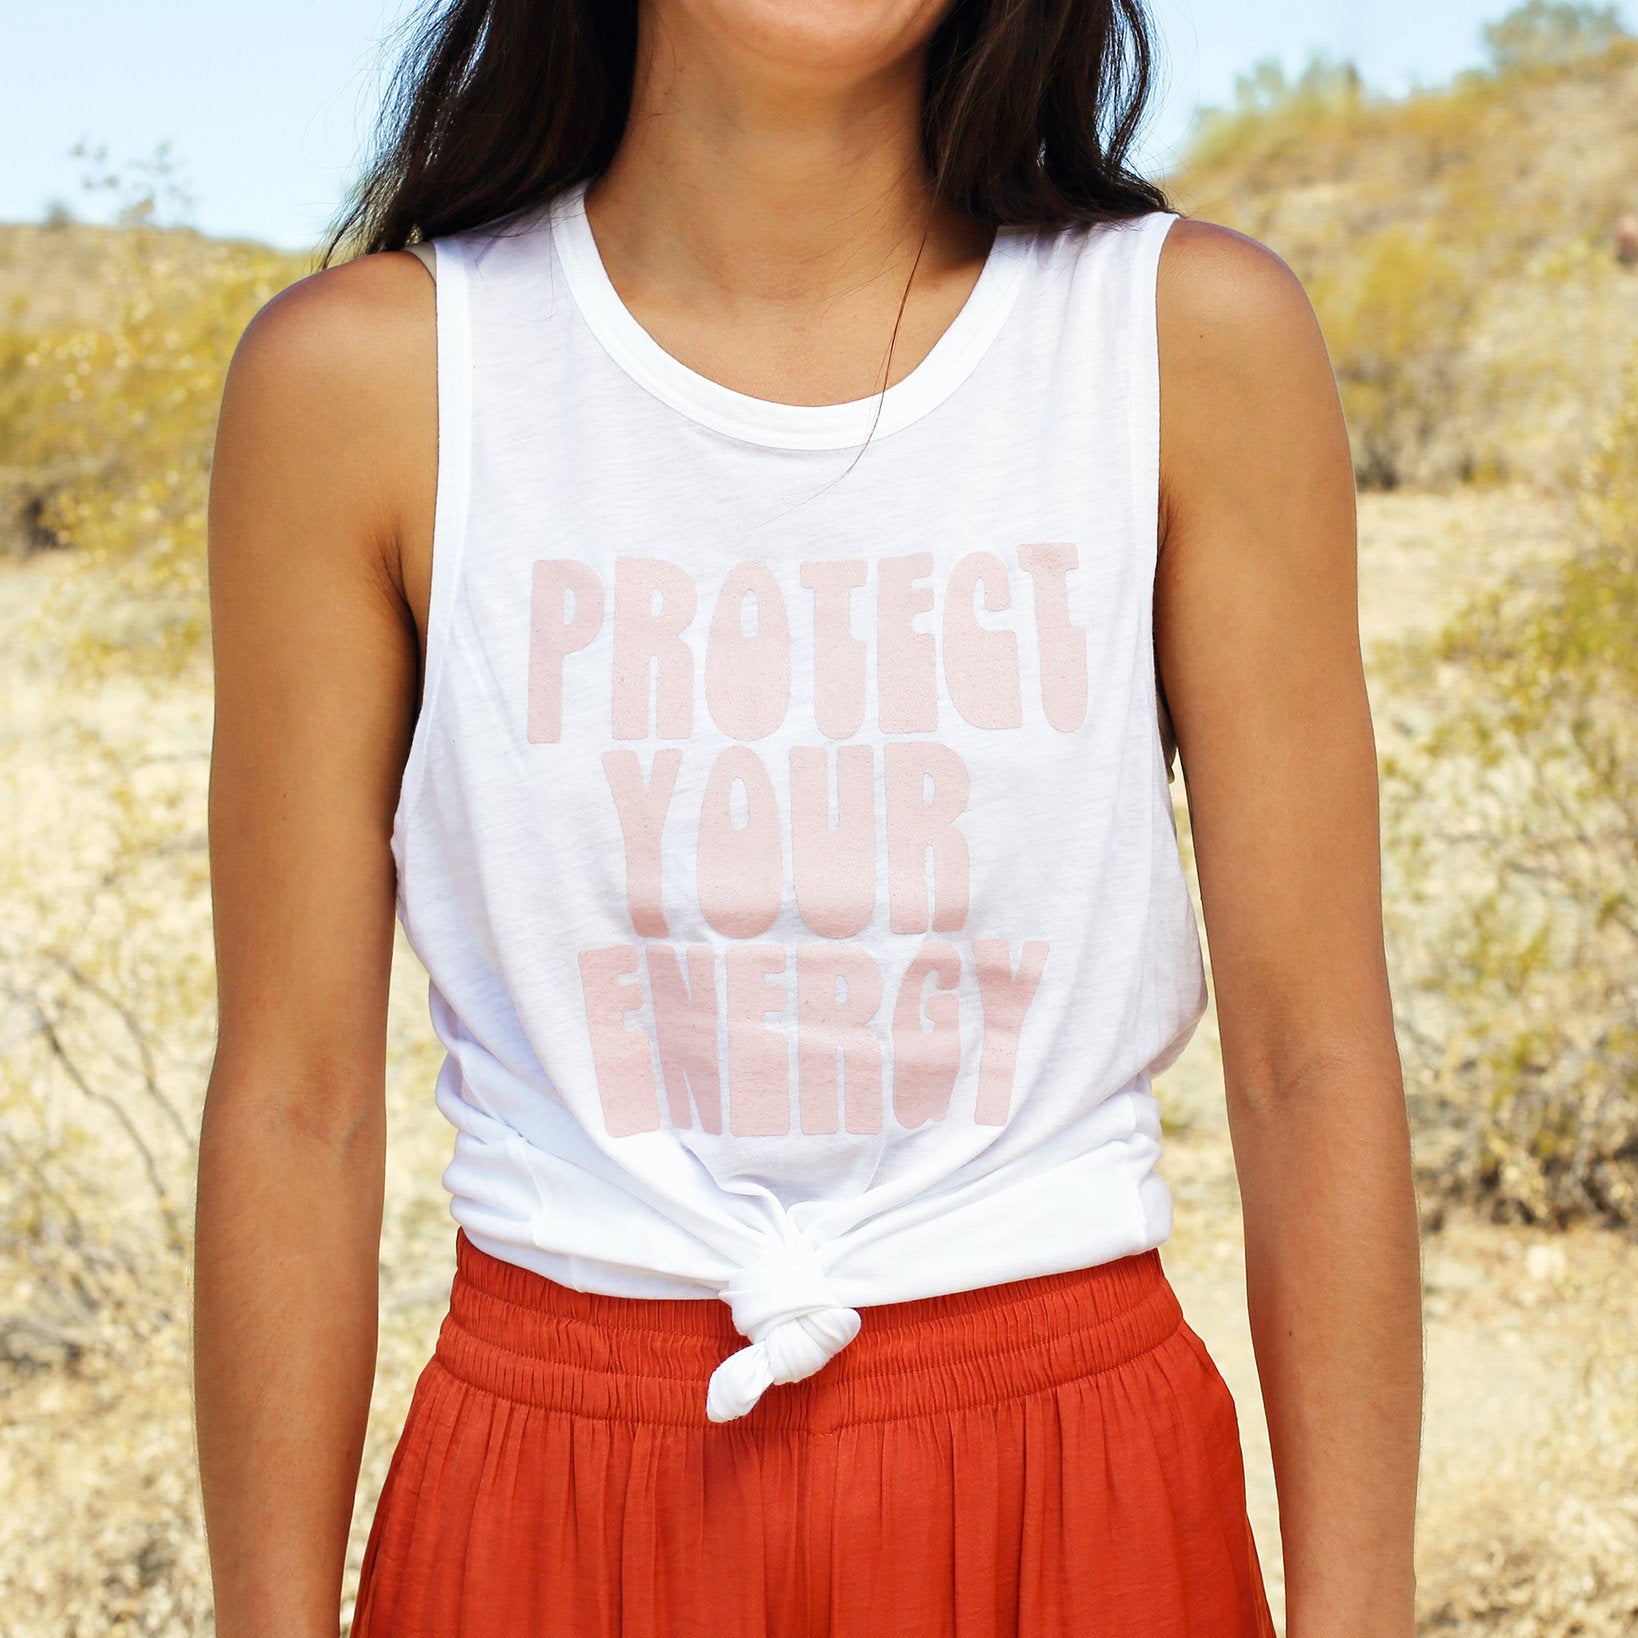 Protect Your Energy Tank Top